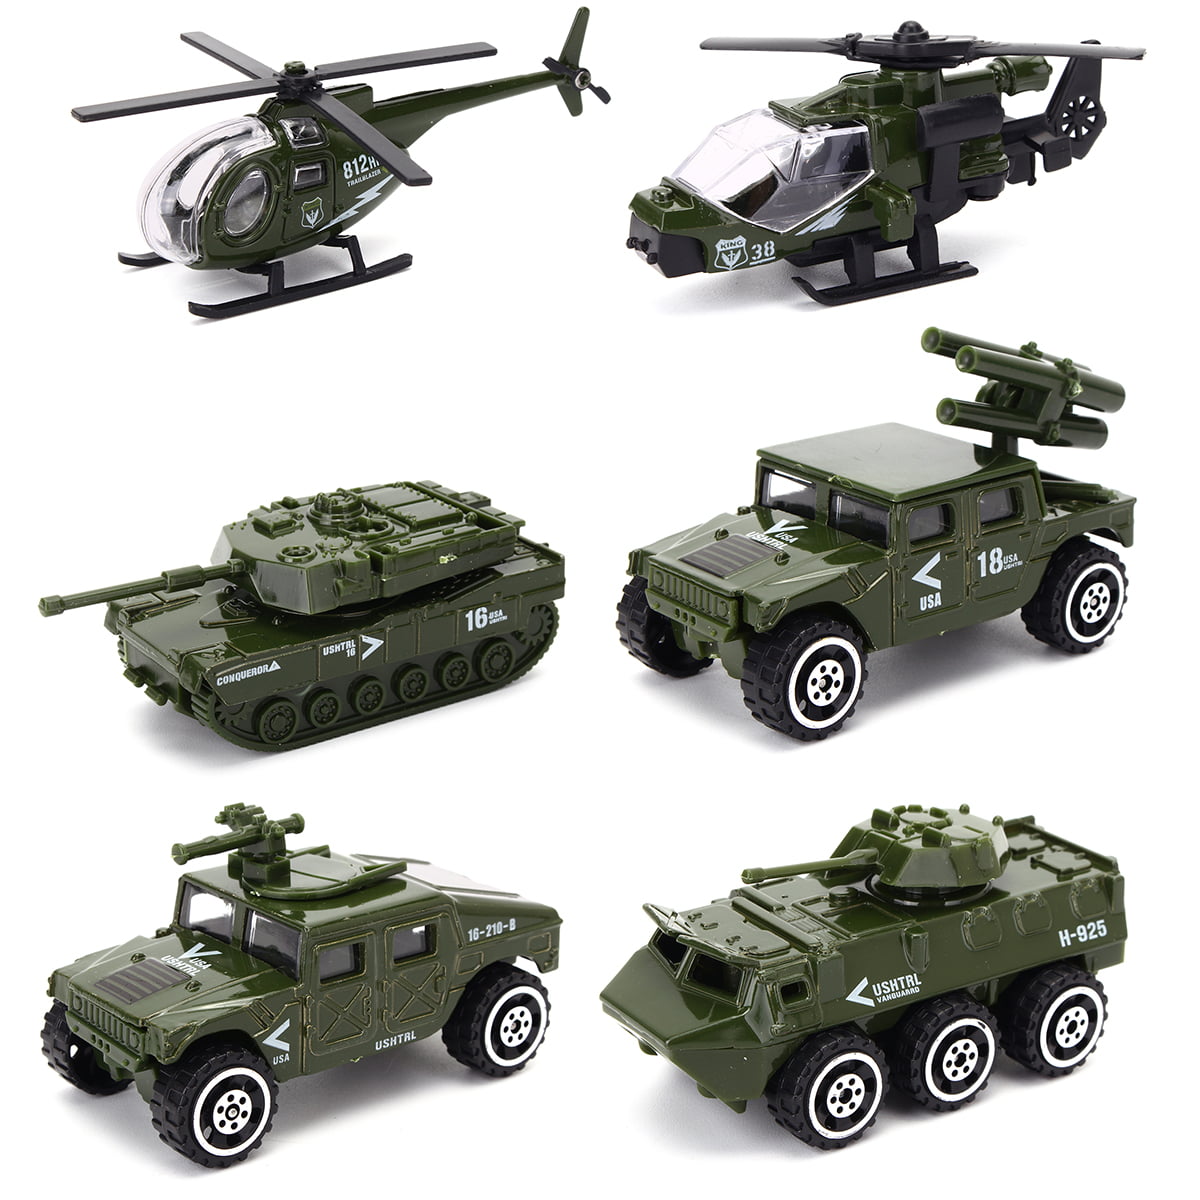 Set of 6pcs Diecast Metal Military Vehicle Toy Set for Kids Children Gift 